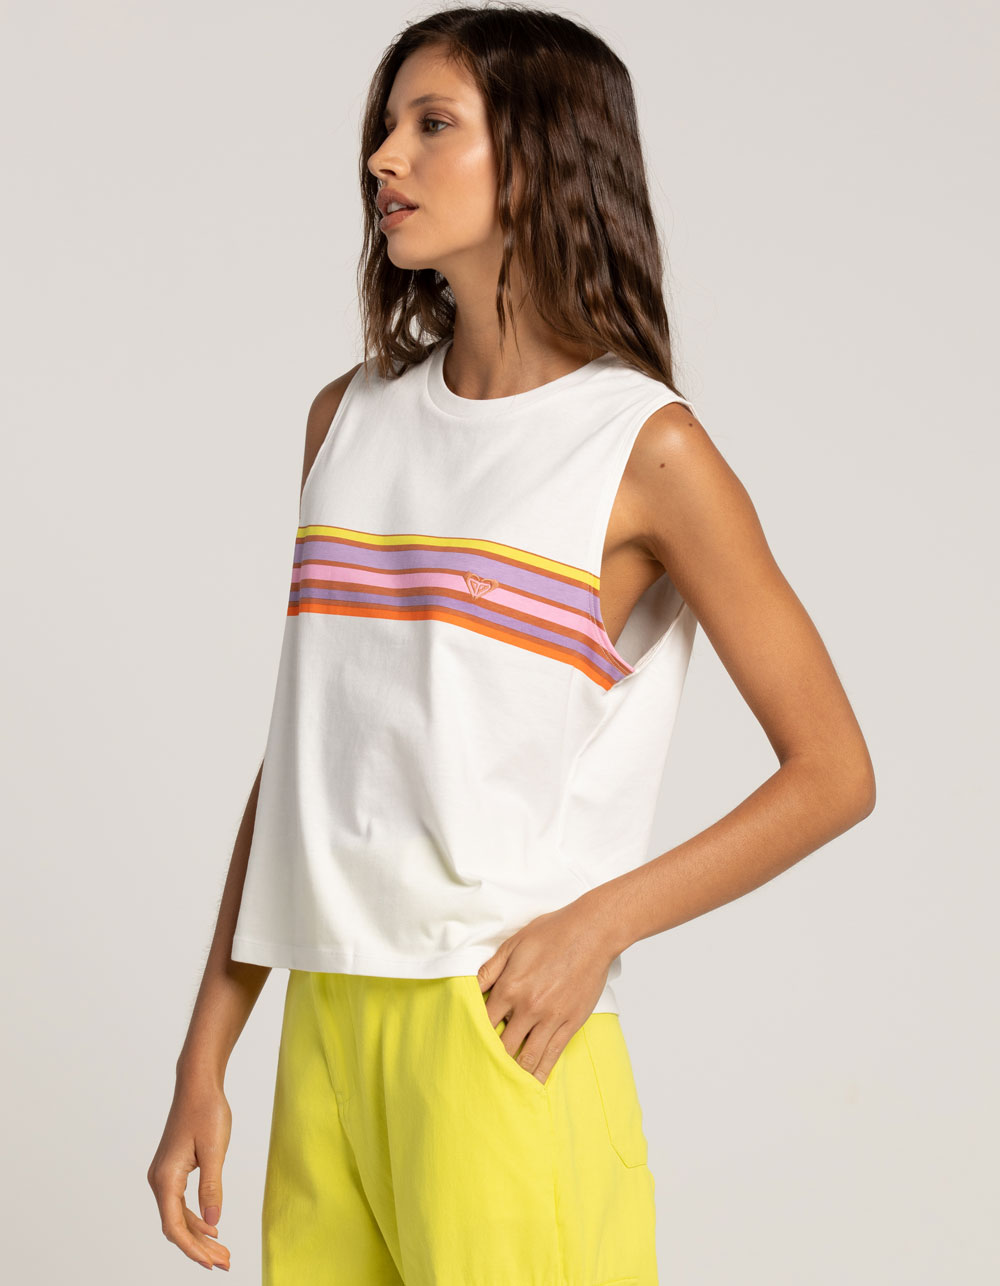 ROXY x Bosworth Surf Tee Muscle Kate Kind Kate | WHITE - Womens Tillys